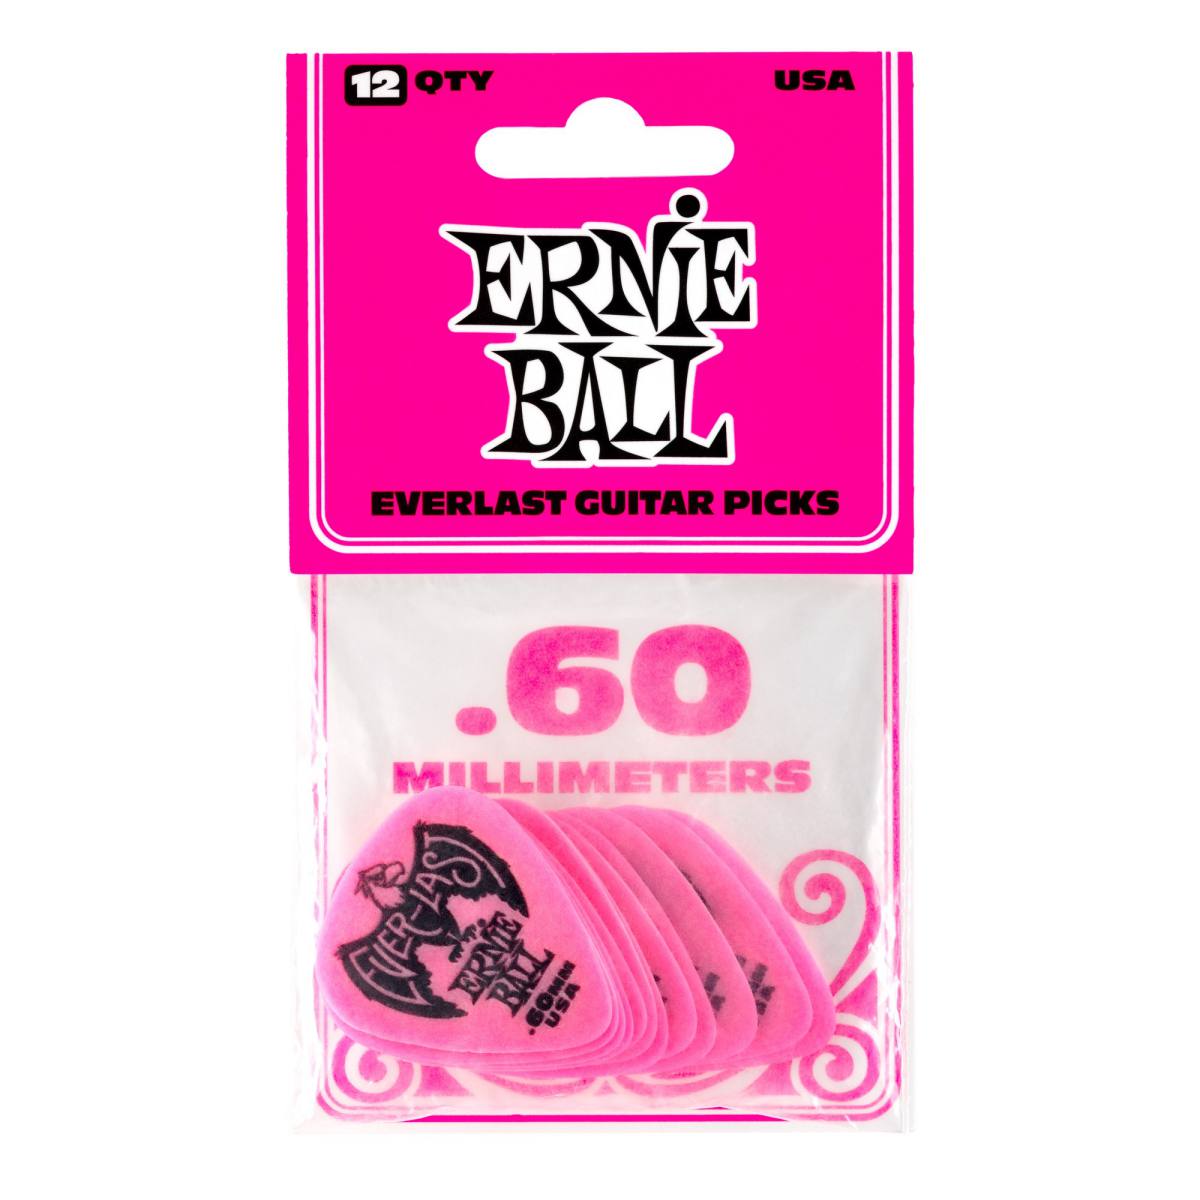 An image of Ernie Ball Everlast 0.60mm Guitar Picks Pink (Pack of 12) - Gift for a Guitarist...